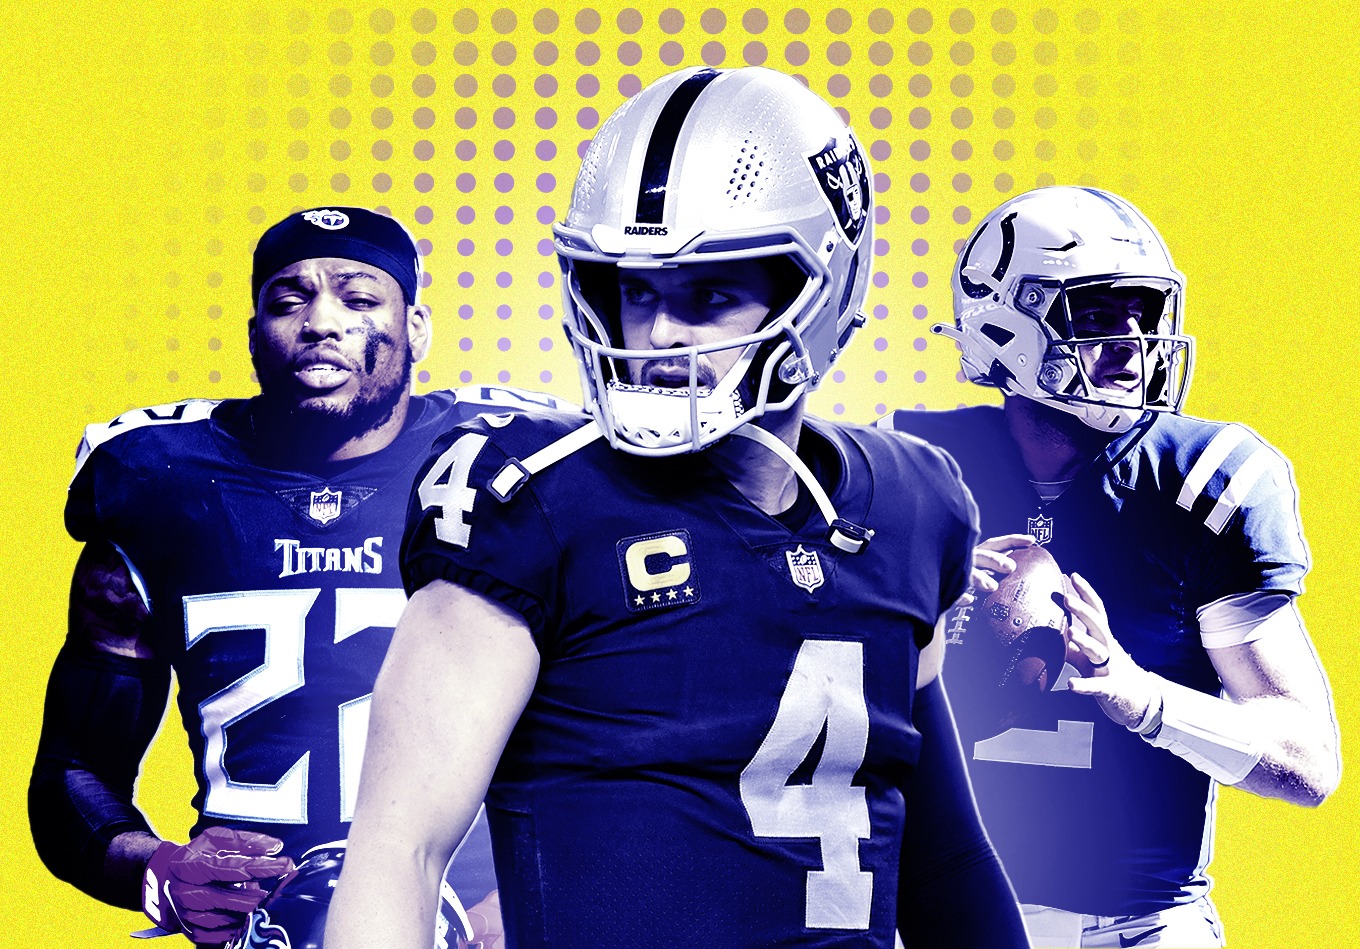 Cover 3: Will the Titans Take Down Another Top AFC Contender?